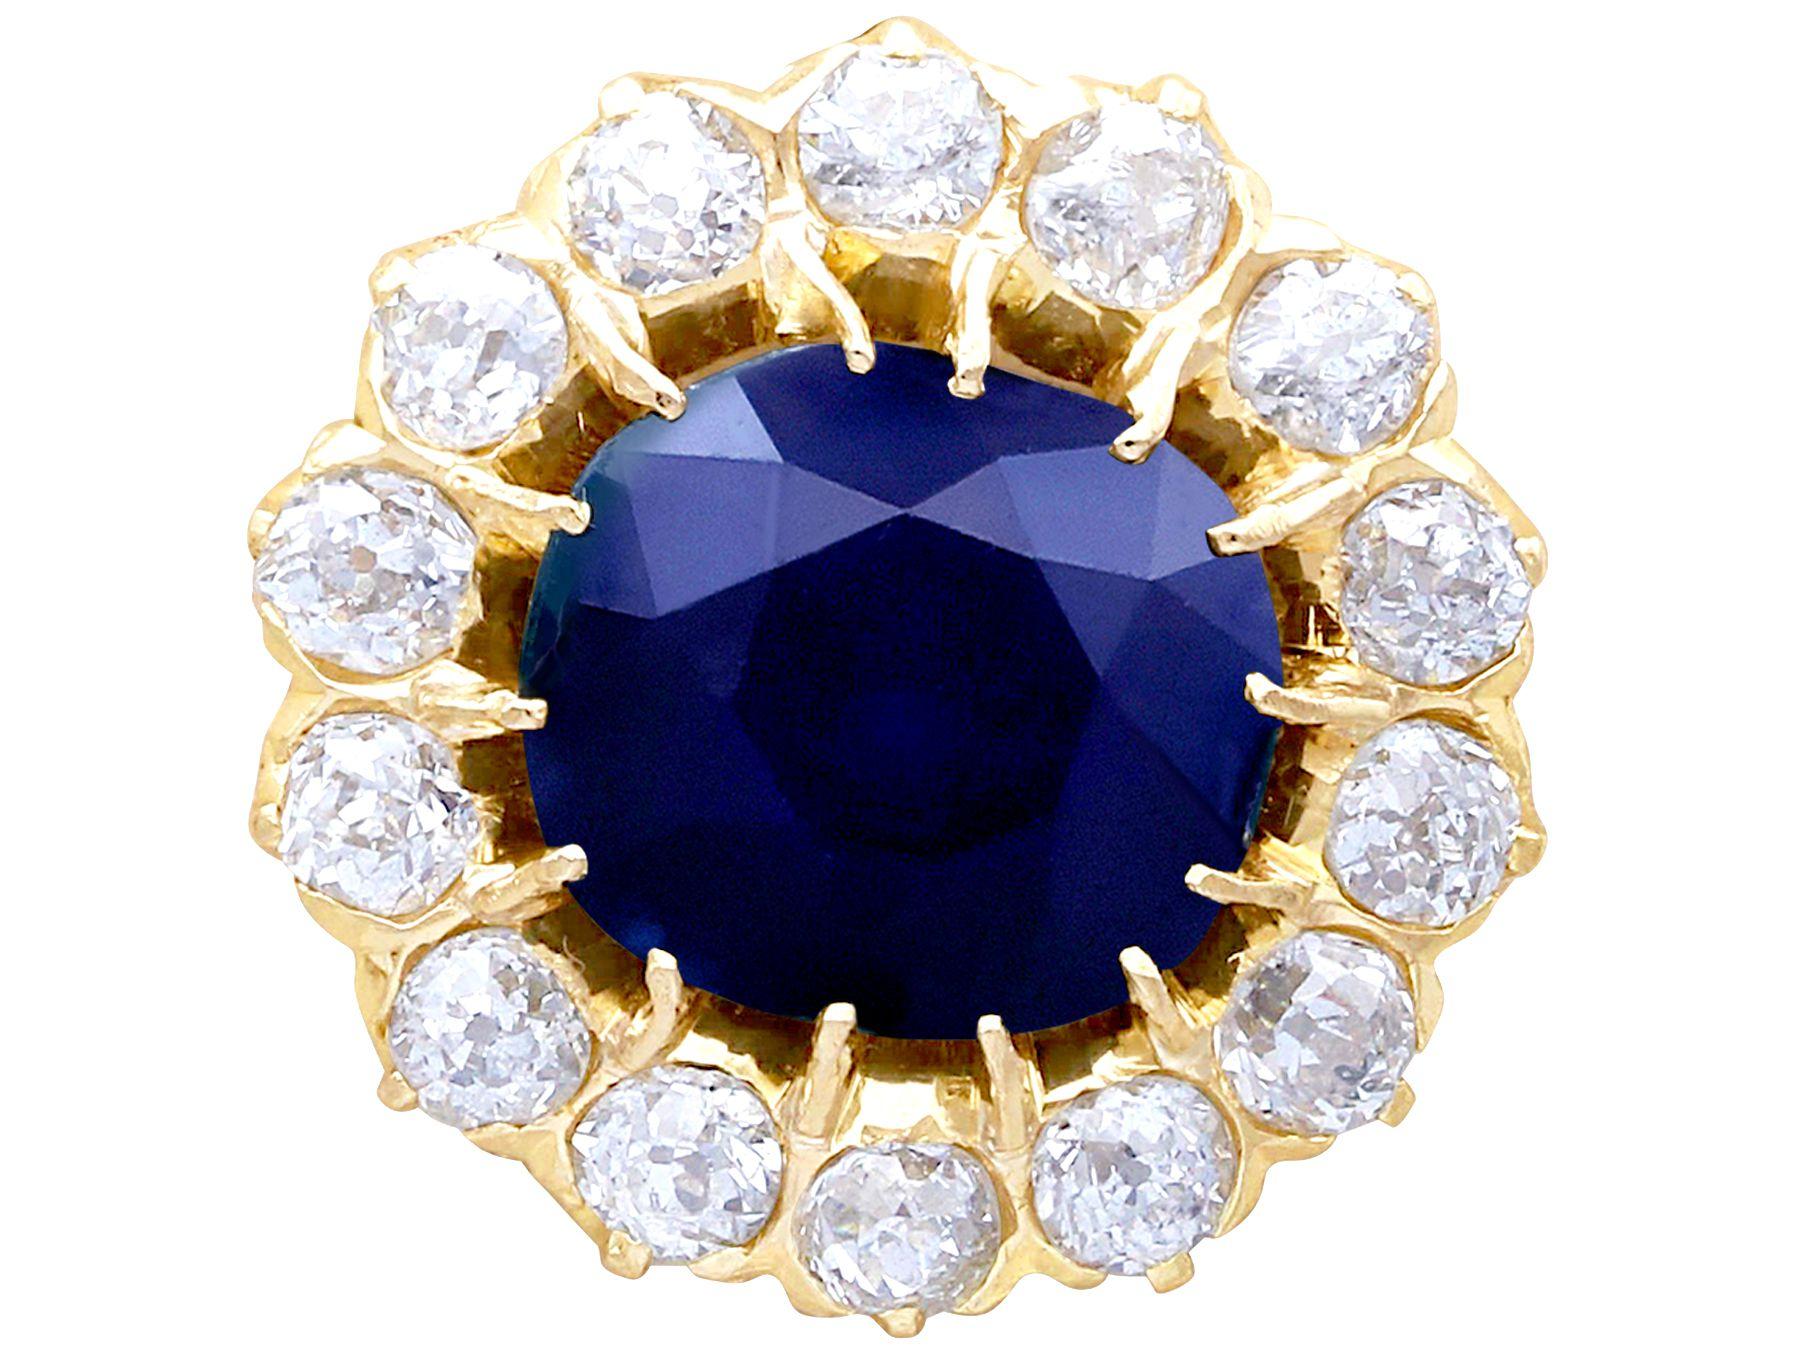 Oval Cut 7.05Ct Sapphire and 2.31Ct Diamond Yellow Gold Cluster Earrings, Circa 1930